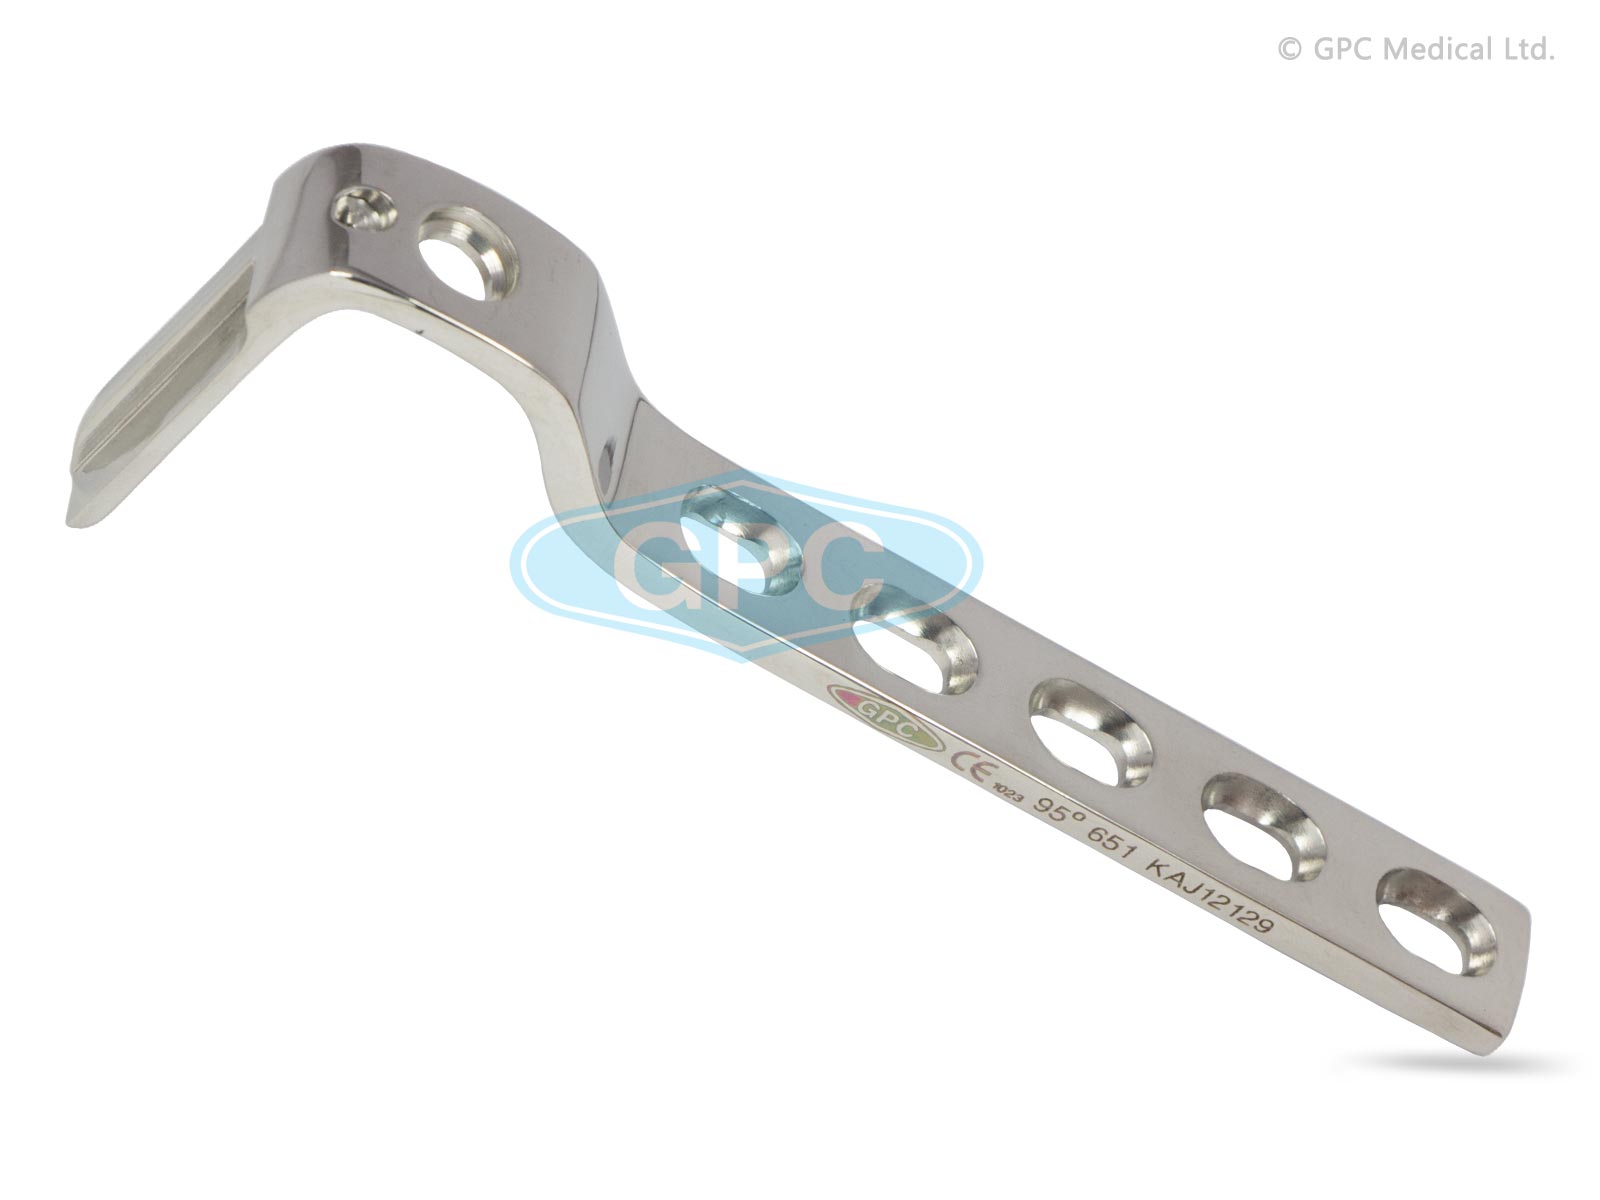 Angled Blade Plates For Intertrochanteric Femoral Osteotomies In Small Adults Adolescents 651 